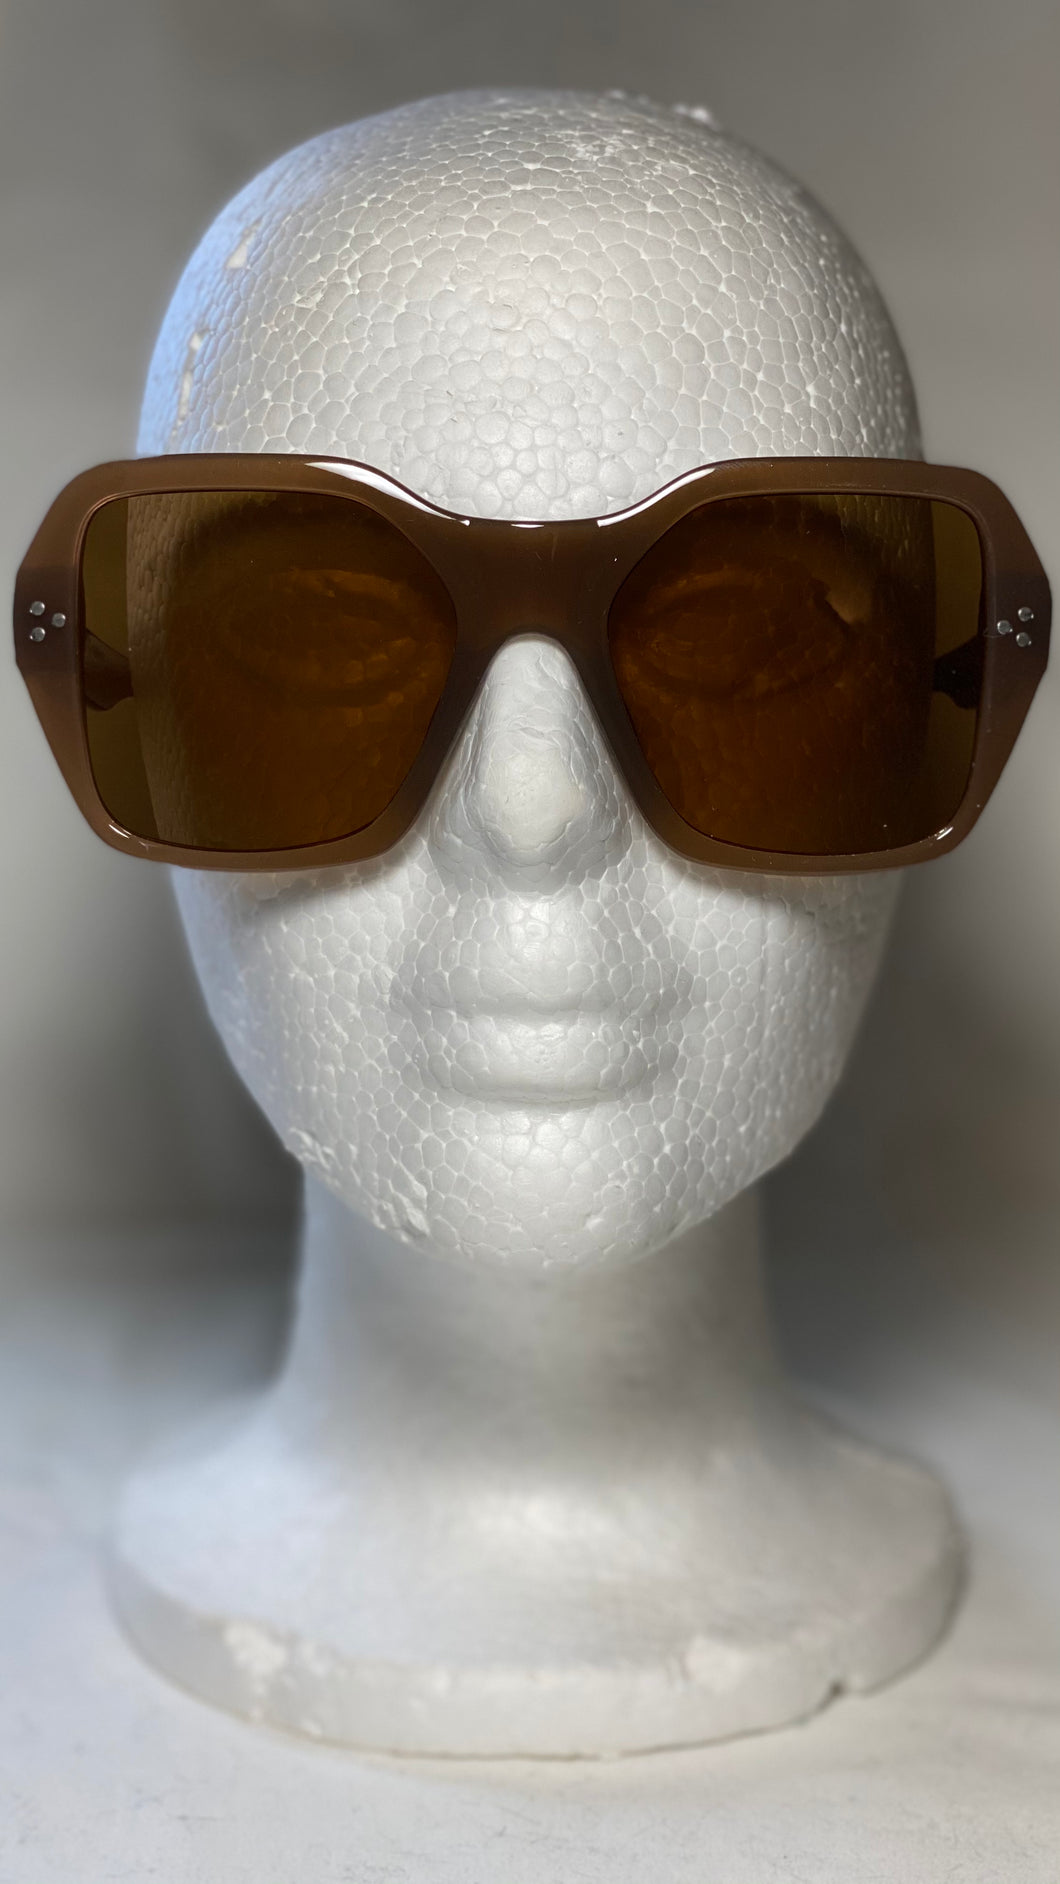 The Past-time Sunglasses